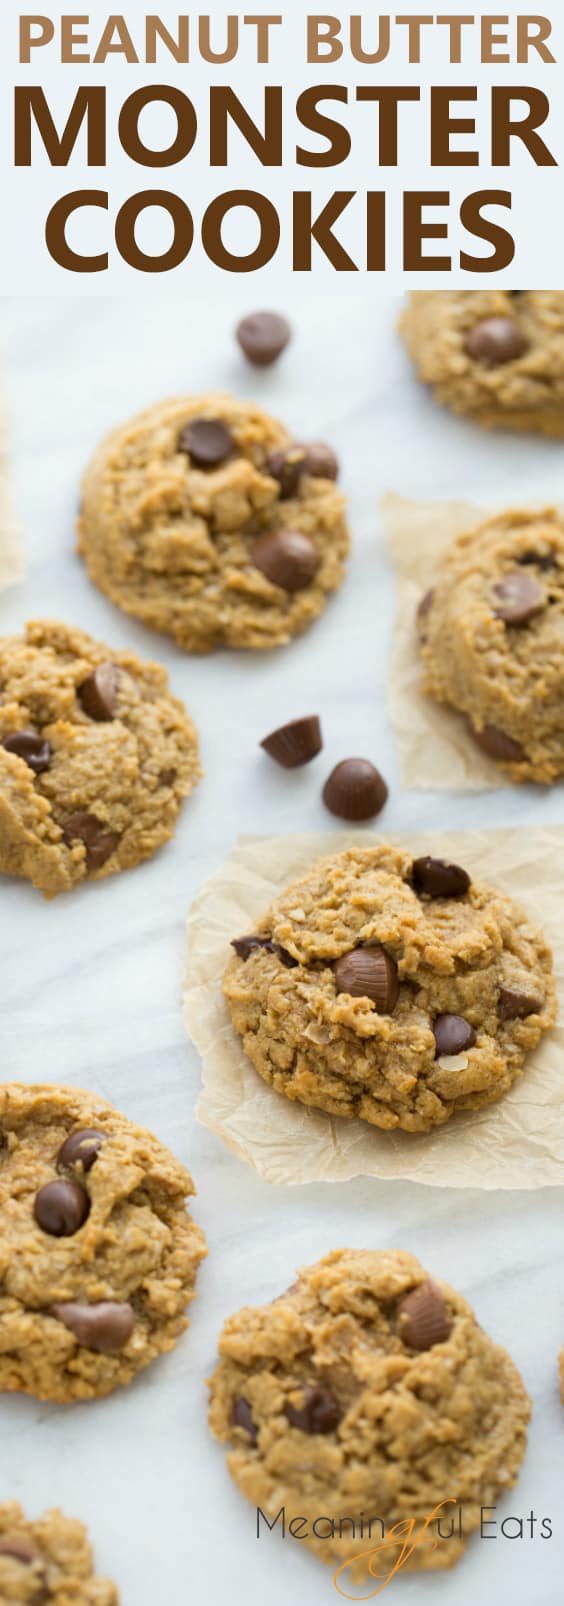 Peanut Butter Monster Cookies! Easy gluten-free cookies! from meaningfuleats.com #glutenfreecookies #easyglutenfreerecipes #glutenfreedesserts #glutenfreebakedgoods #glutenfreetreats #flourlesscookies #glutenfree #monstercookies #easycookies #peanutbuttercookies